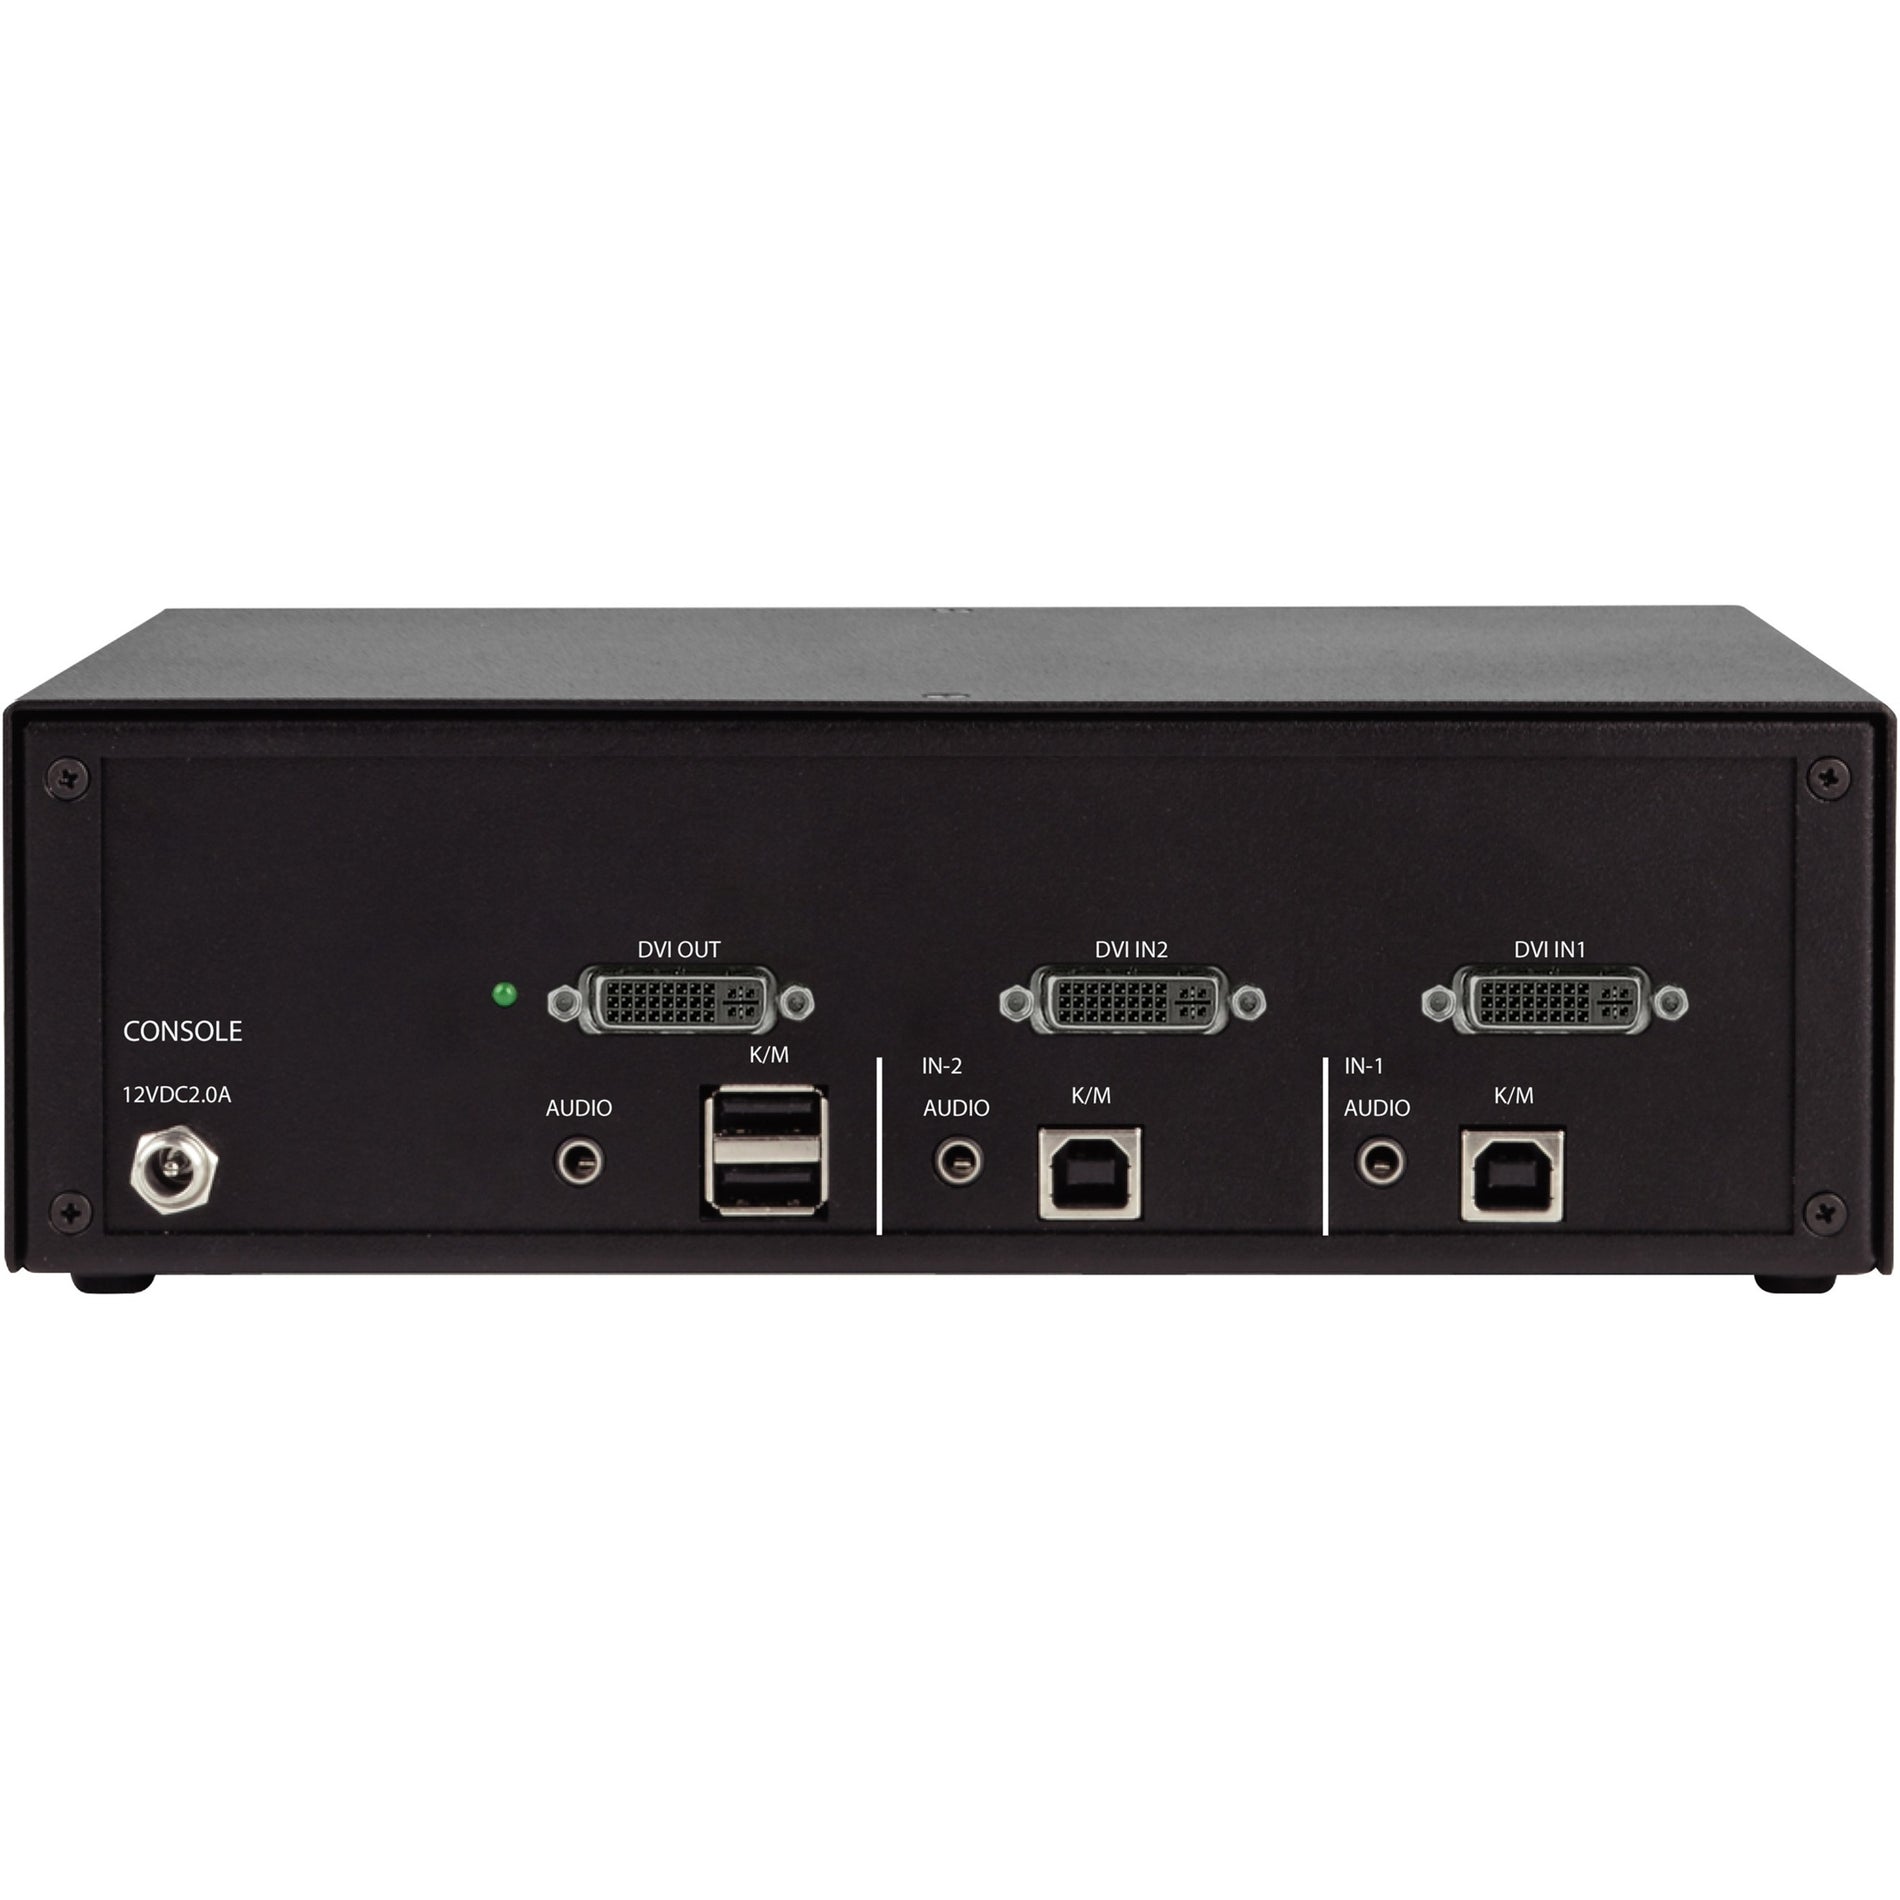 Black Box KVS4-1002D Secure KVM Switch - DVI-I, 2560 x 1600, 2 Computers Supported, 1 Local User